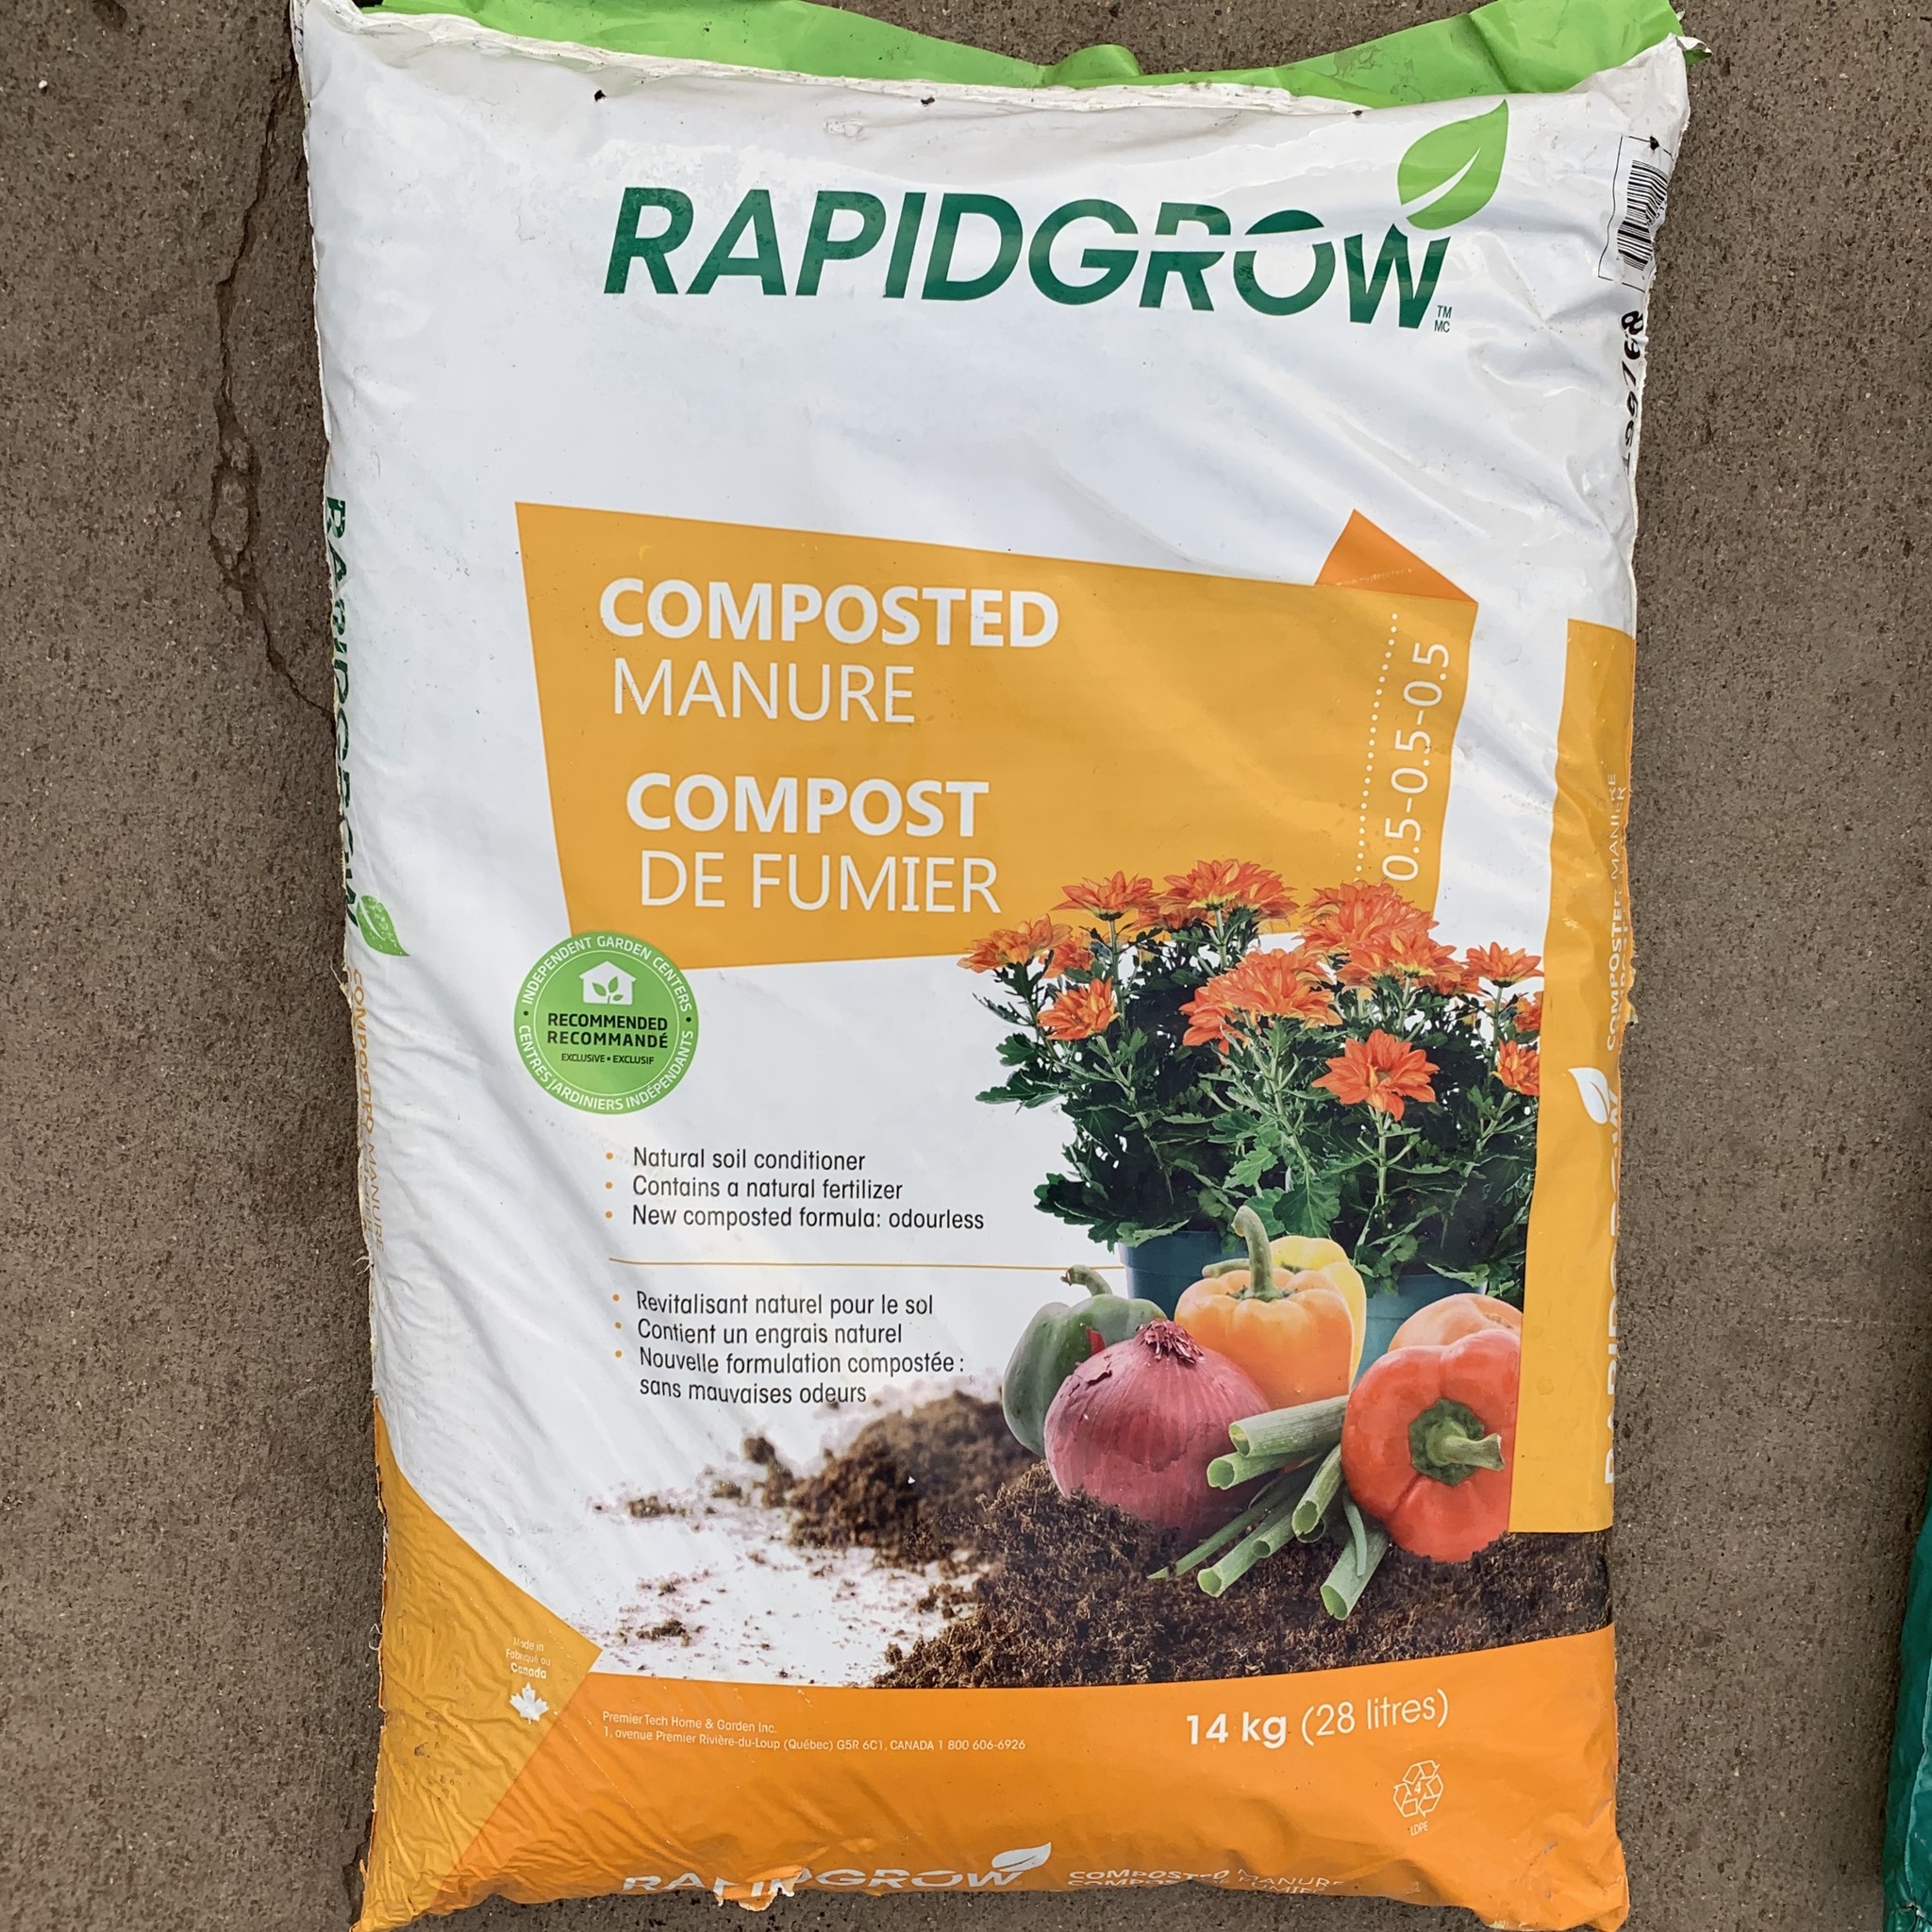 Rapid Grow Composted Manure 14kg